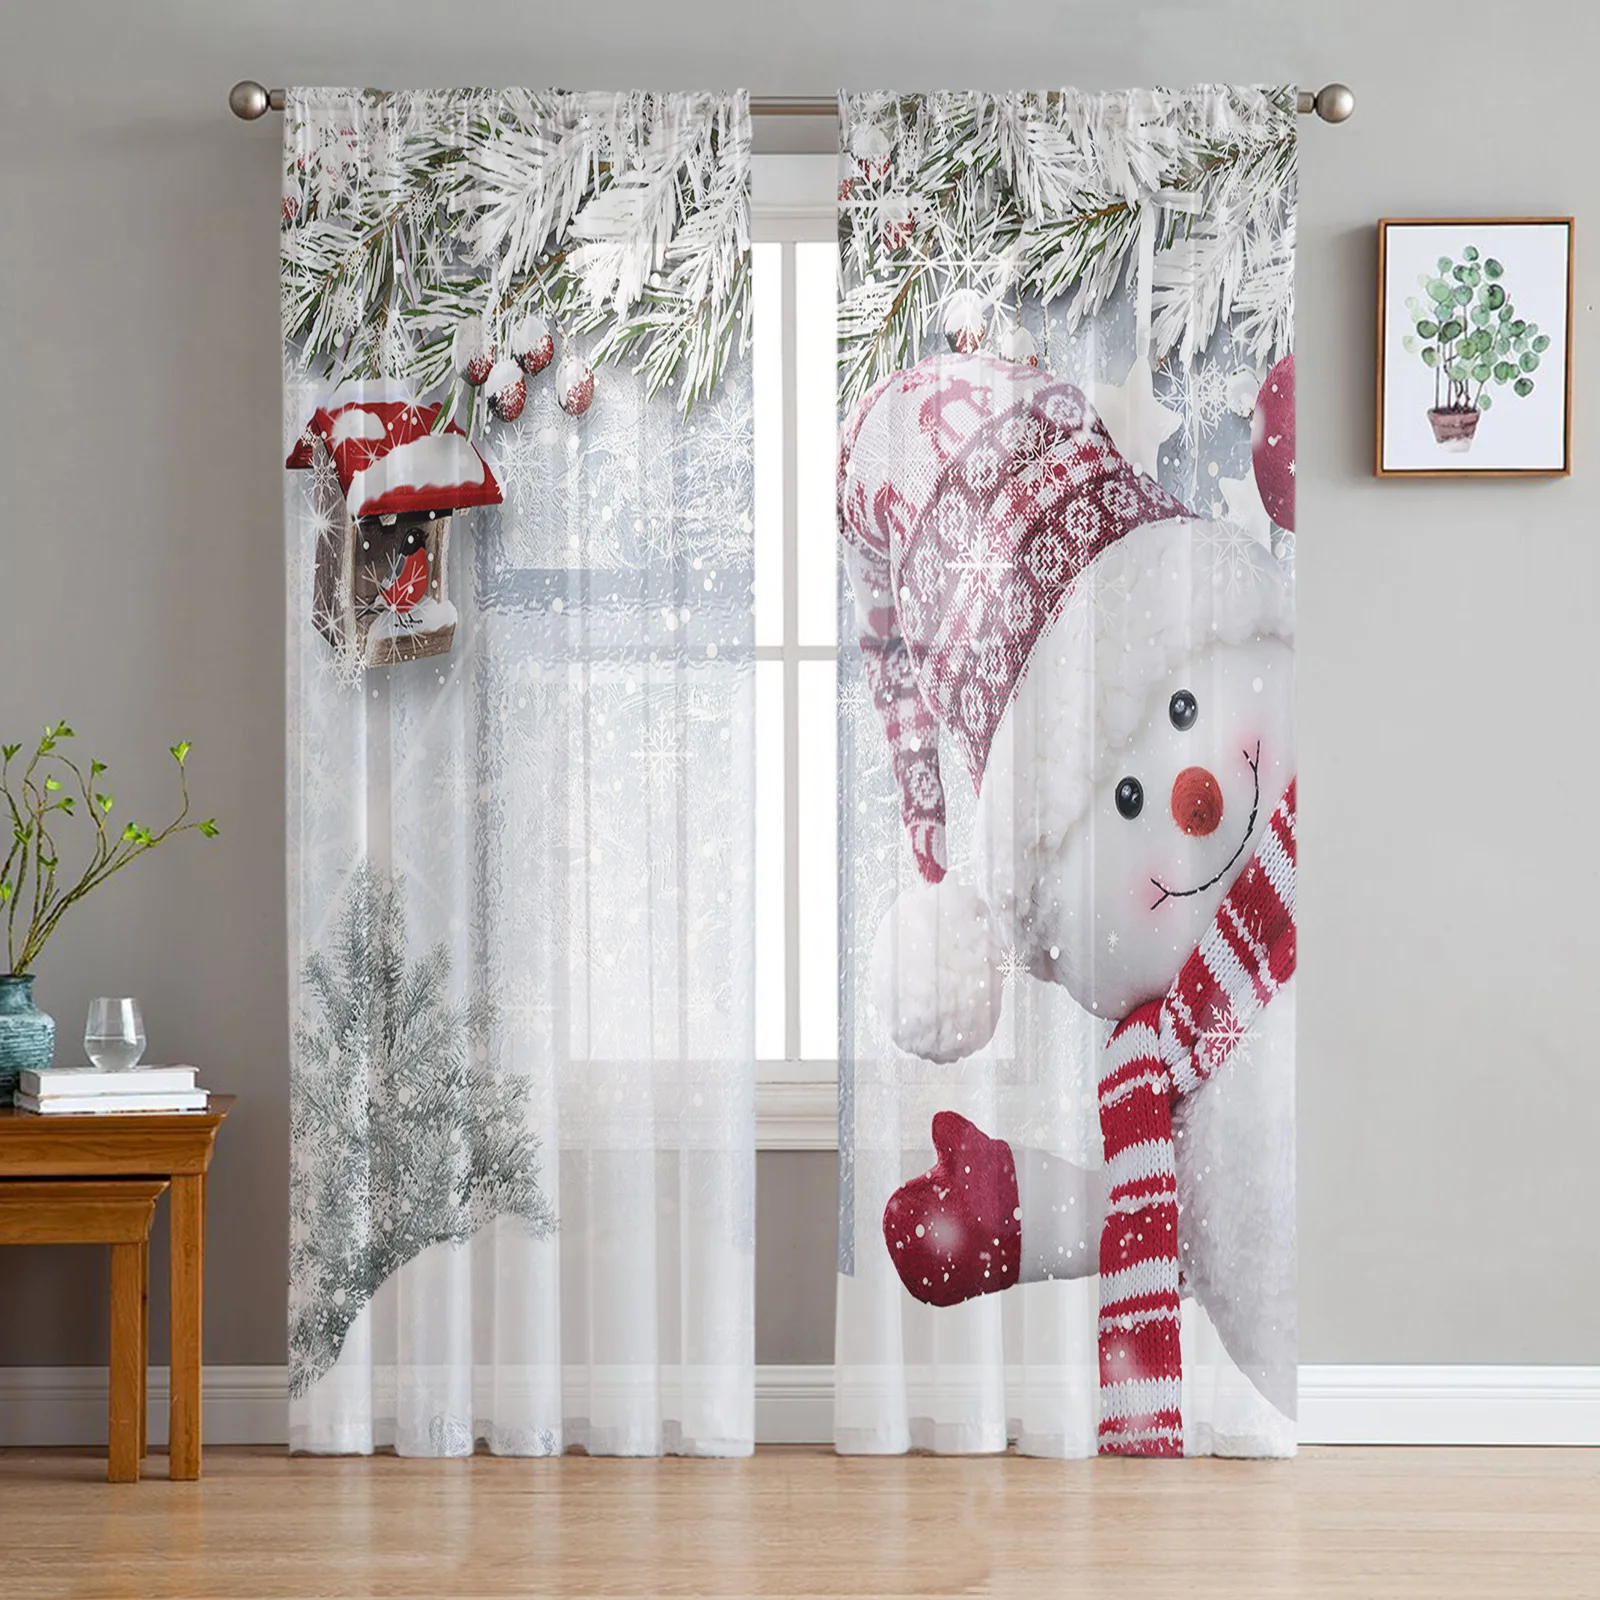 

Christmas Winter Snow Scene Snowman Window Tulle Curtains for Living Room Kitchen Christmas Home Decor Sheer Voile Curtains